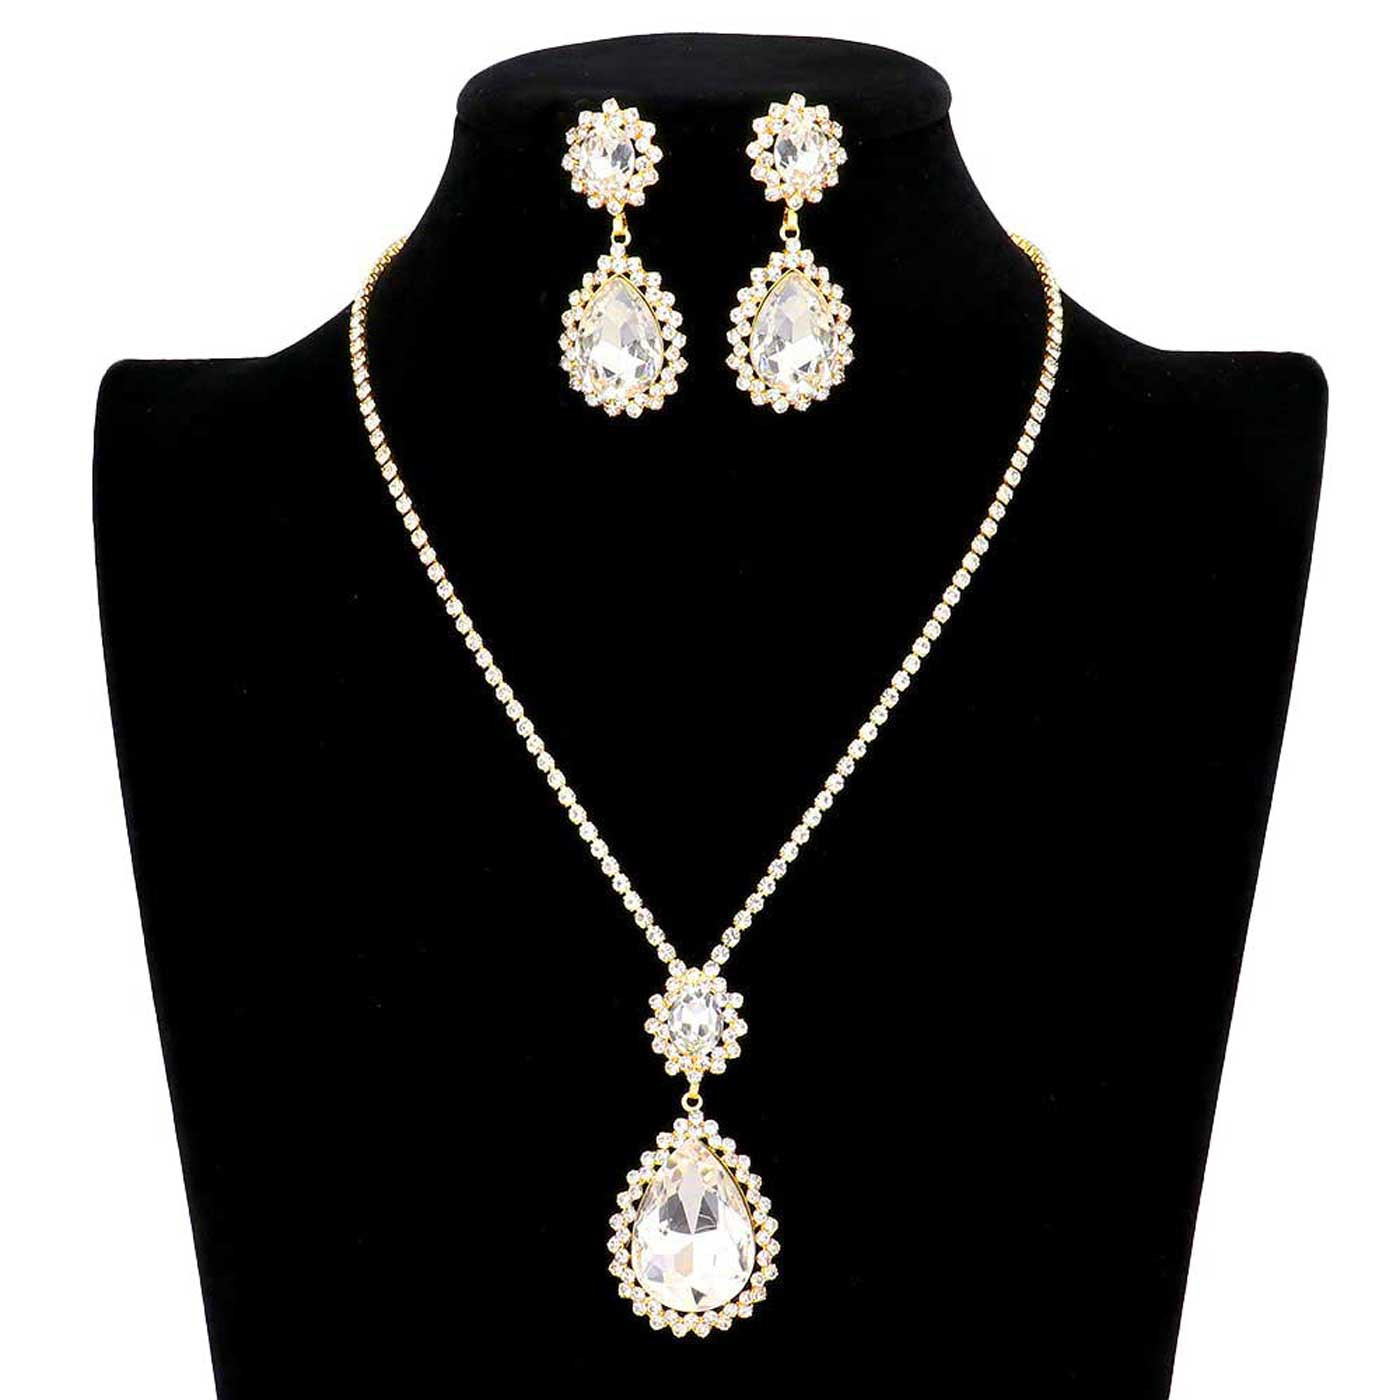 Gold Teardrop Accented Rhinestone Necklace. These gorgeous rhinestone pieces will show your class in any special occasion. The elegance of these rhinestone goes unmatched, great for wearing at a party! Perfect jewelry to enhance your look. Awesome gift for birthday, Anniversary, Valentine’s Day or any special occasion.